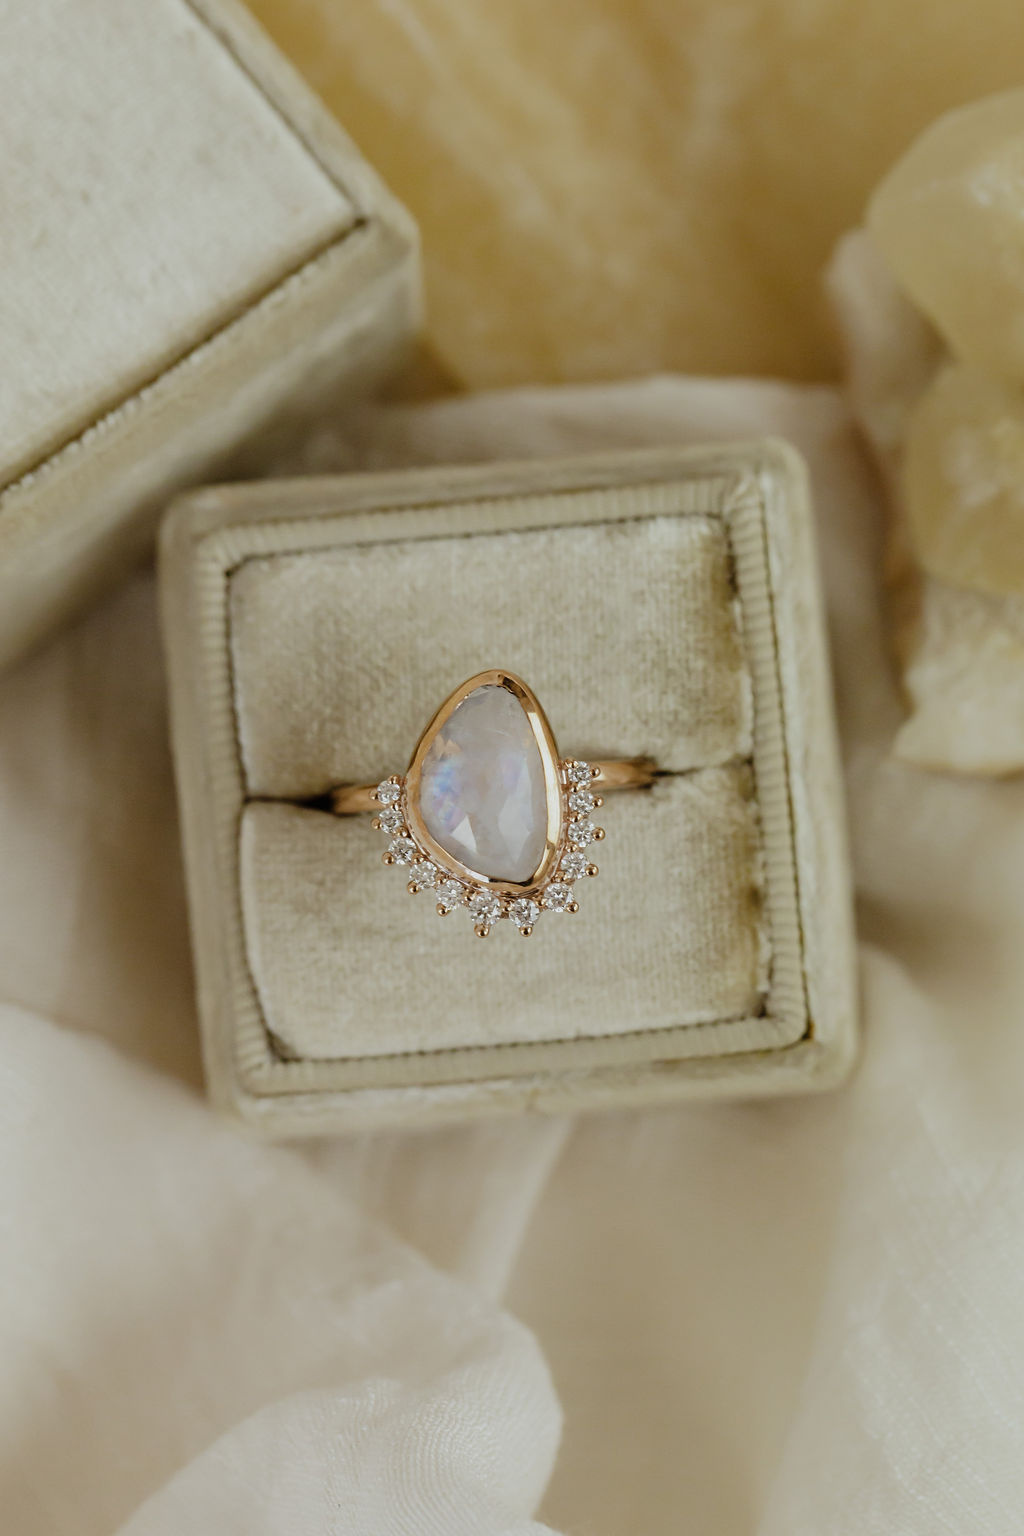 Amazon.com: Moonstone Solitaire - Solid 14K White Gold Moonstone Solitaire  Engagement Ring - Oval 4 Prong Moonstone Solitaire - Dainty Rainbow Moonstone  Ring : Handmade Products